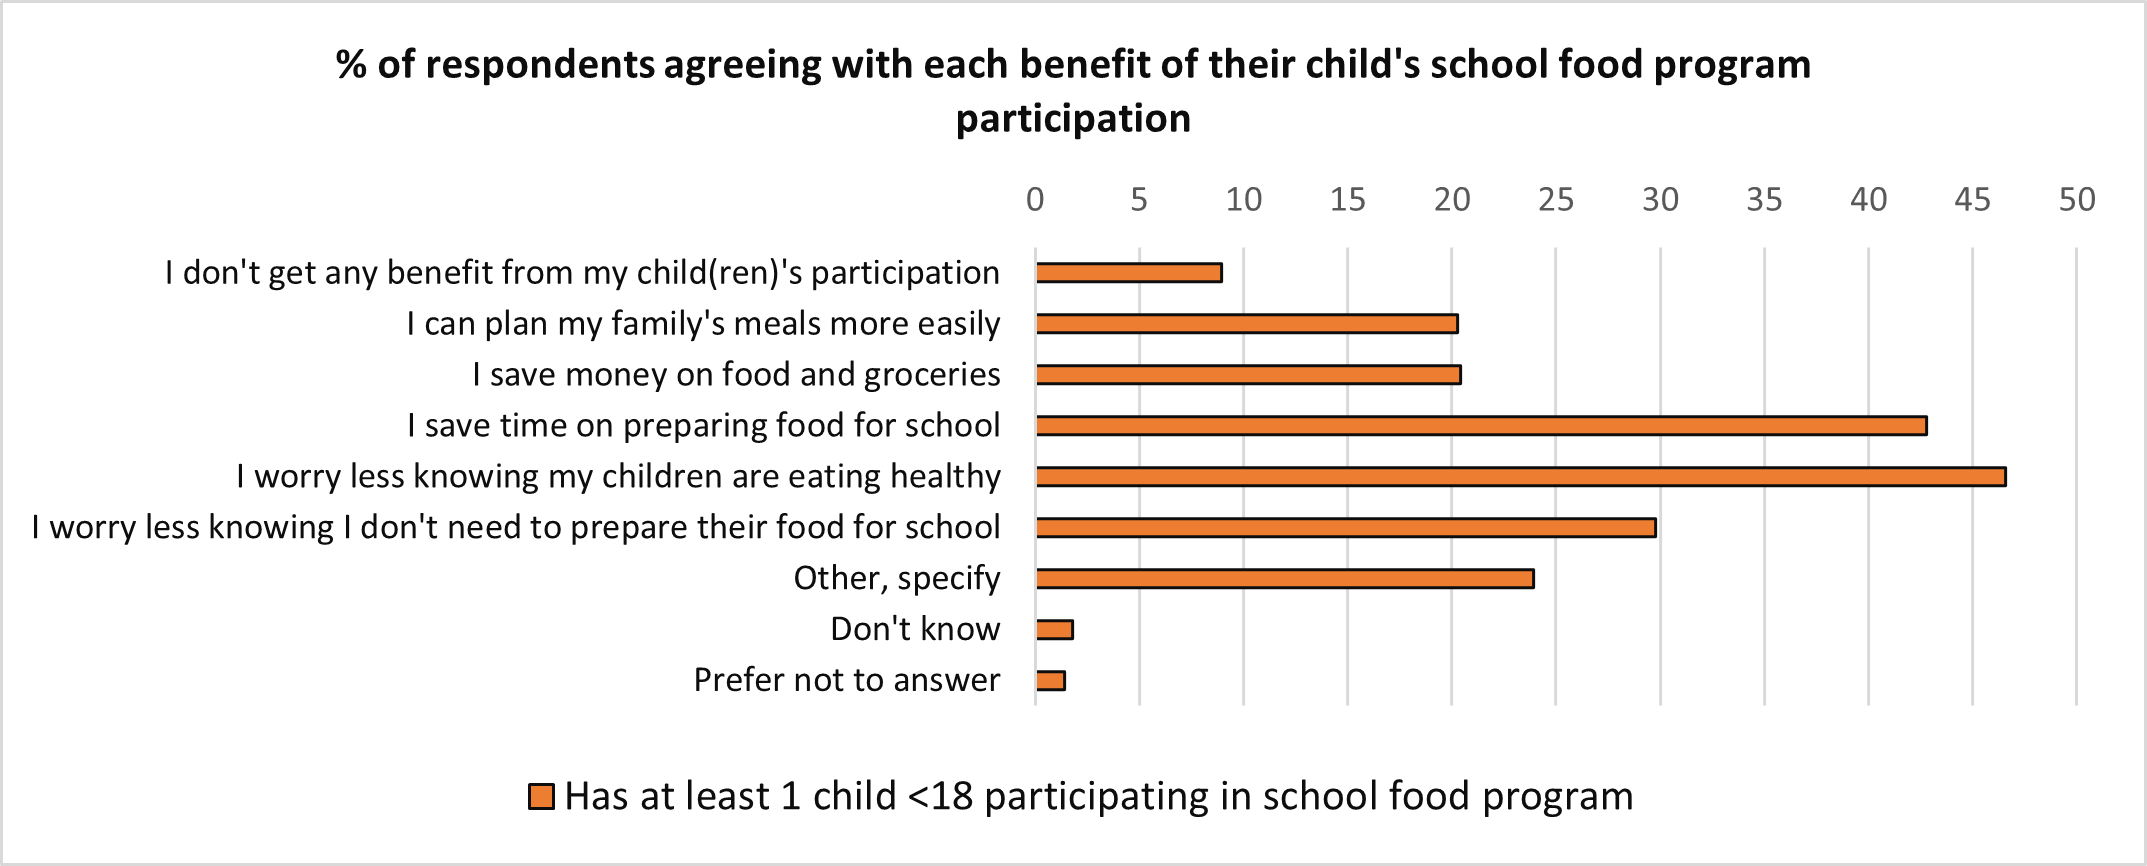 A bar chart of the percent of respondents agreeing with each benefit of their child’s school food program participation. Text version below.